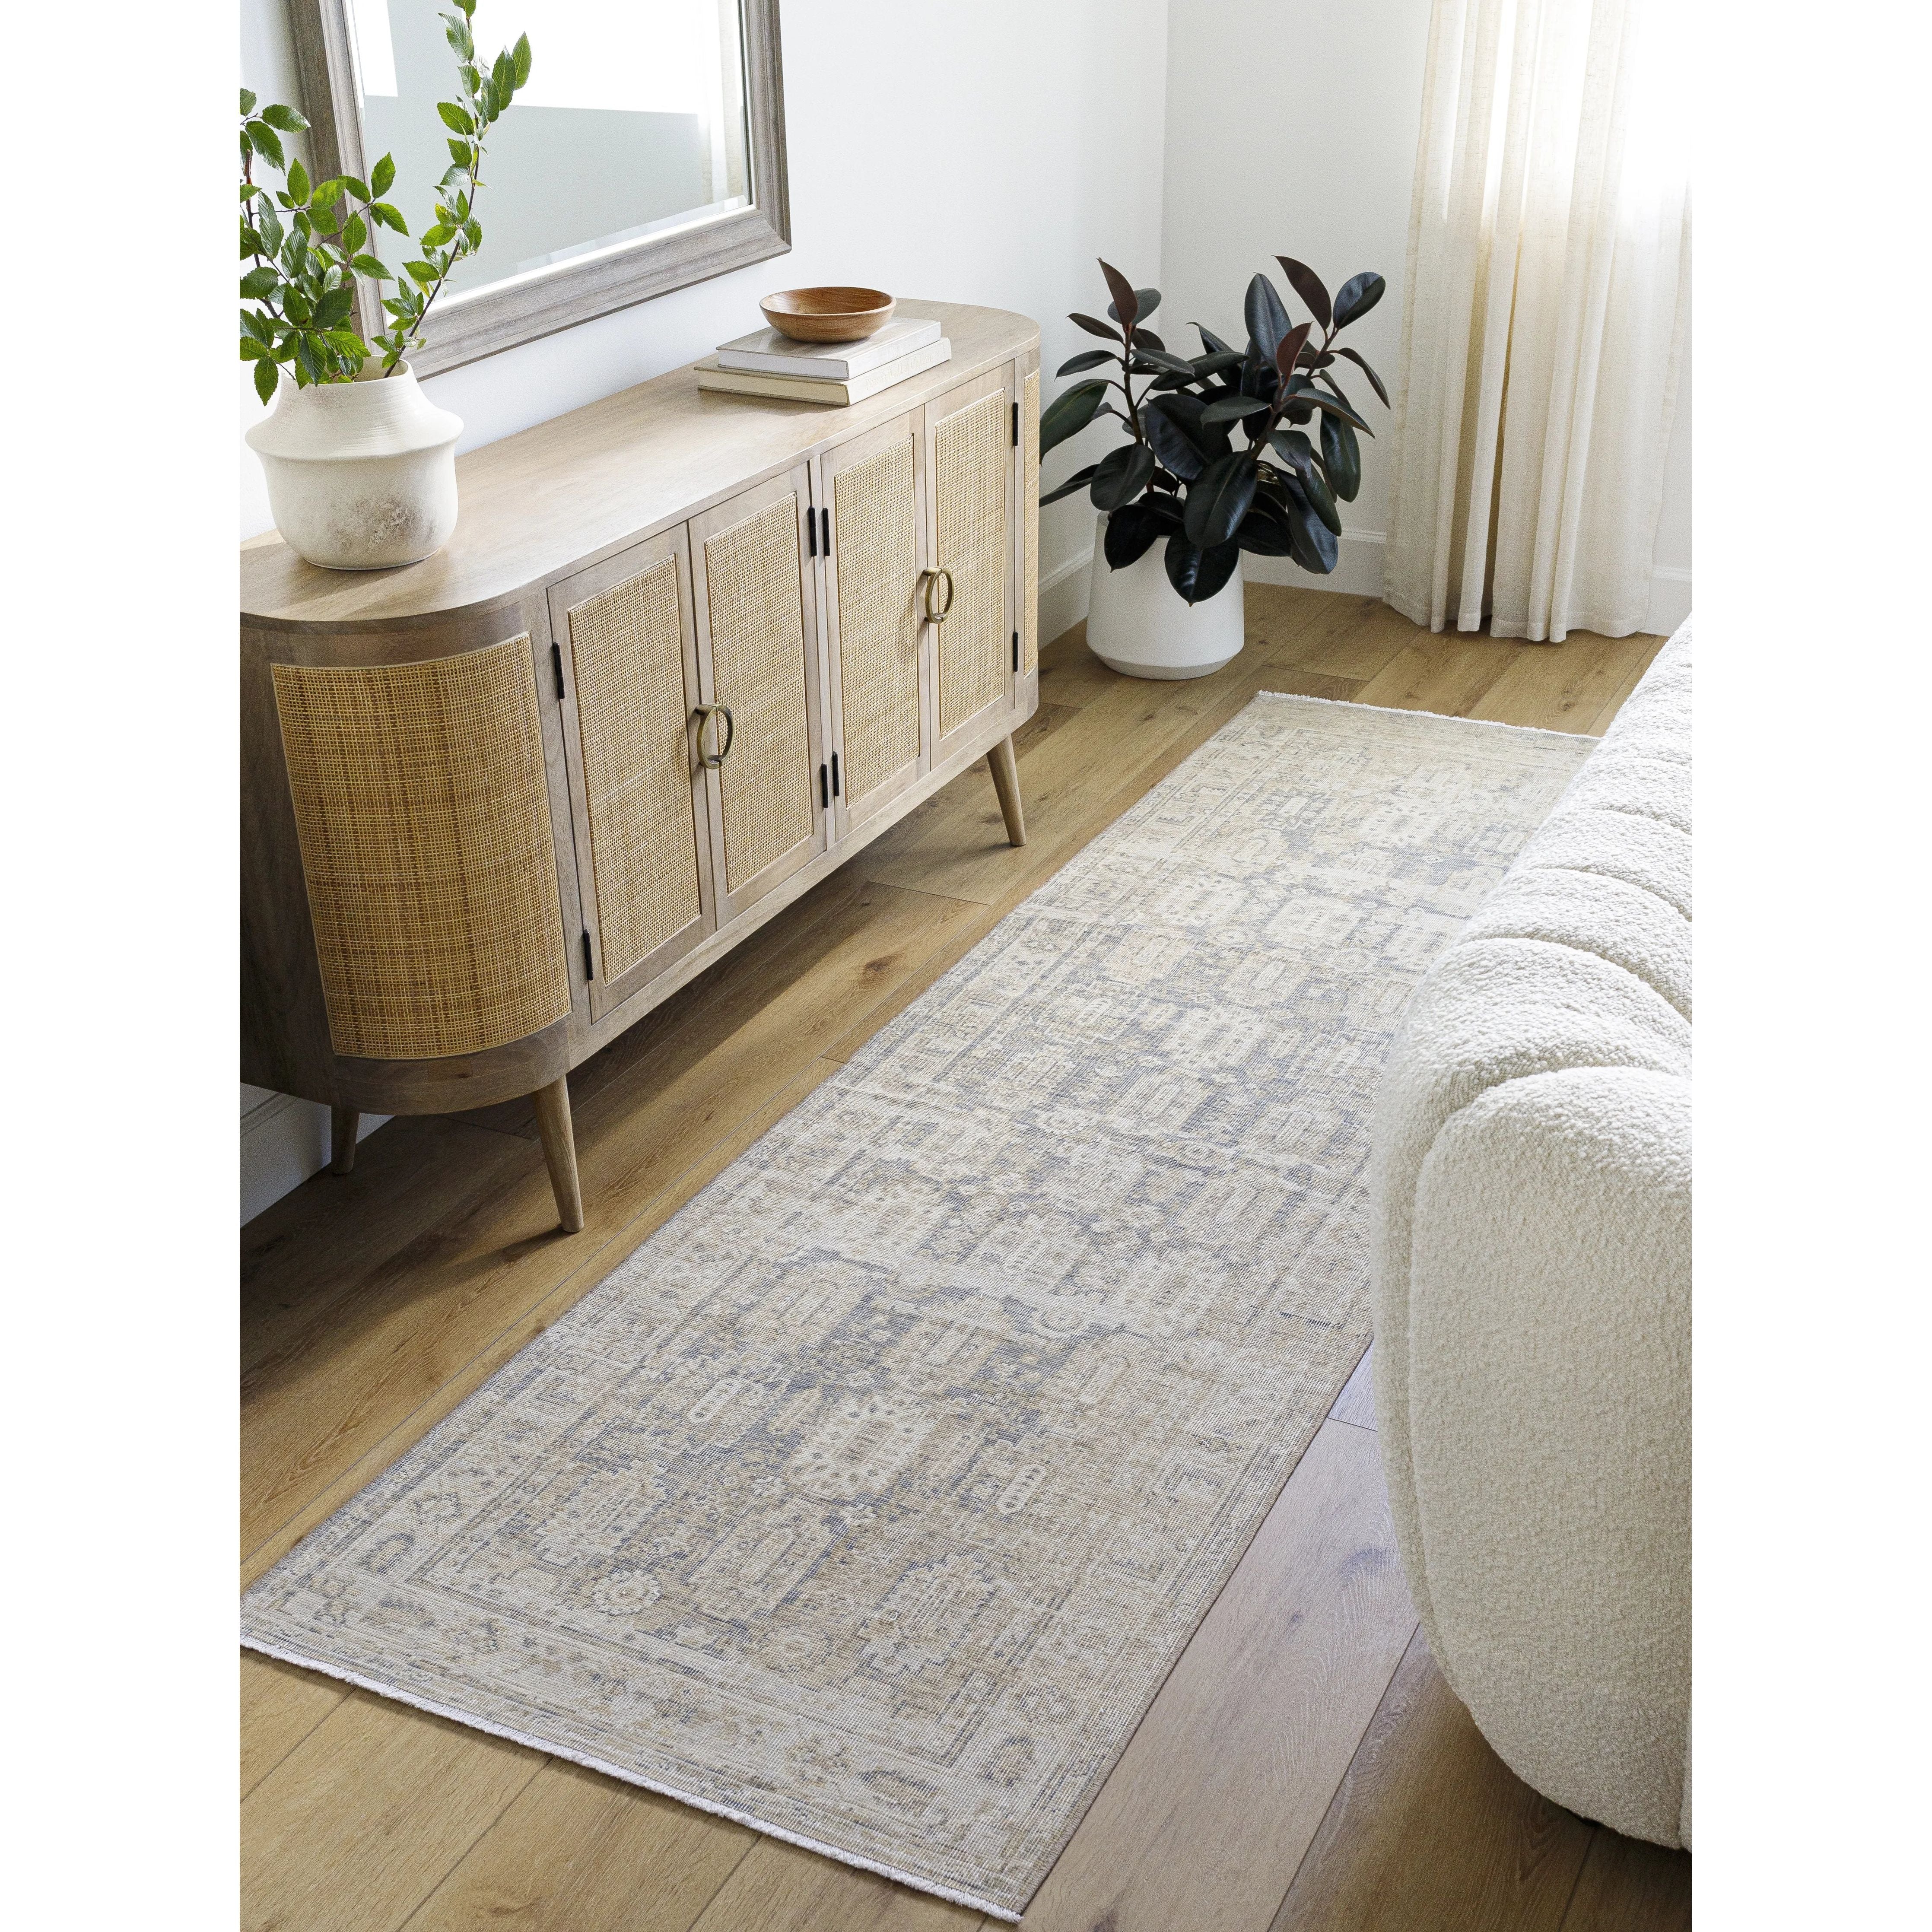 Look no further than the Claire Denim Rug to bring an effortlessly chic style to any room. This beautiful rug is hand crafted for a unique and stylish look that adds the perfect finishing touch Amethyst Home provides interior design, new home construction design consulting, vintage area rugs, and lighting in the Laguna Beach metro area.